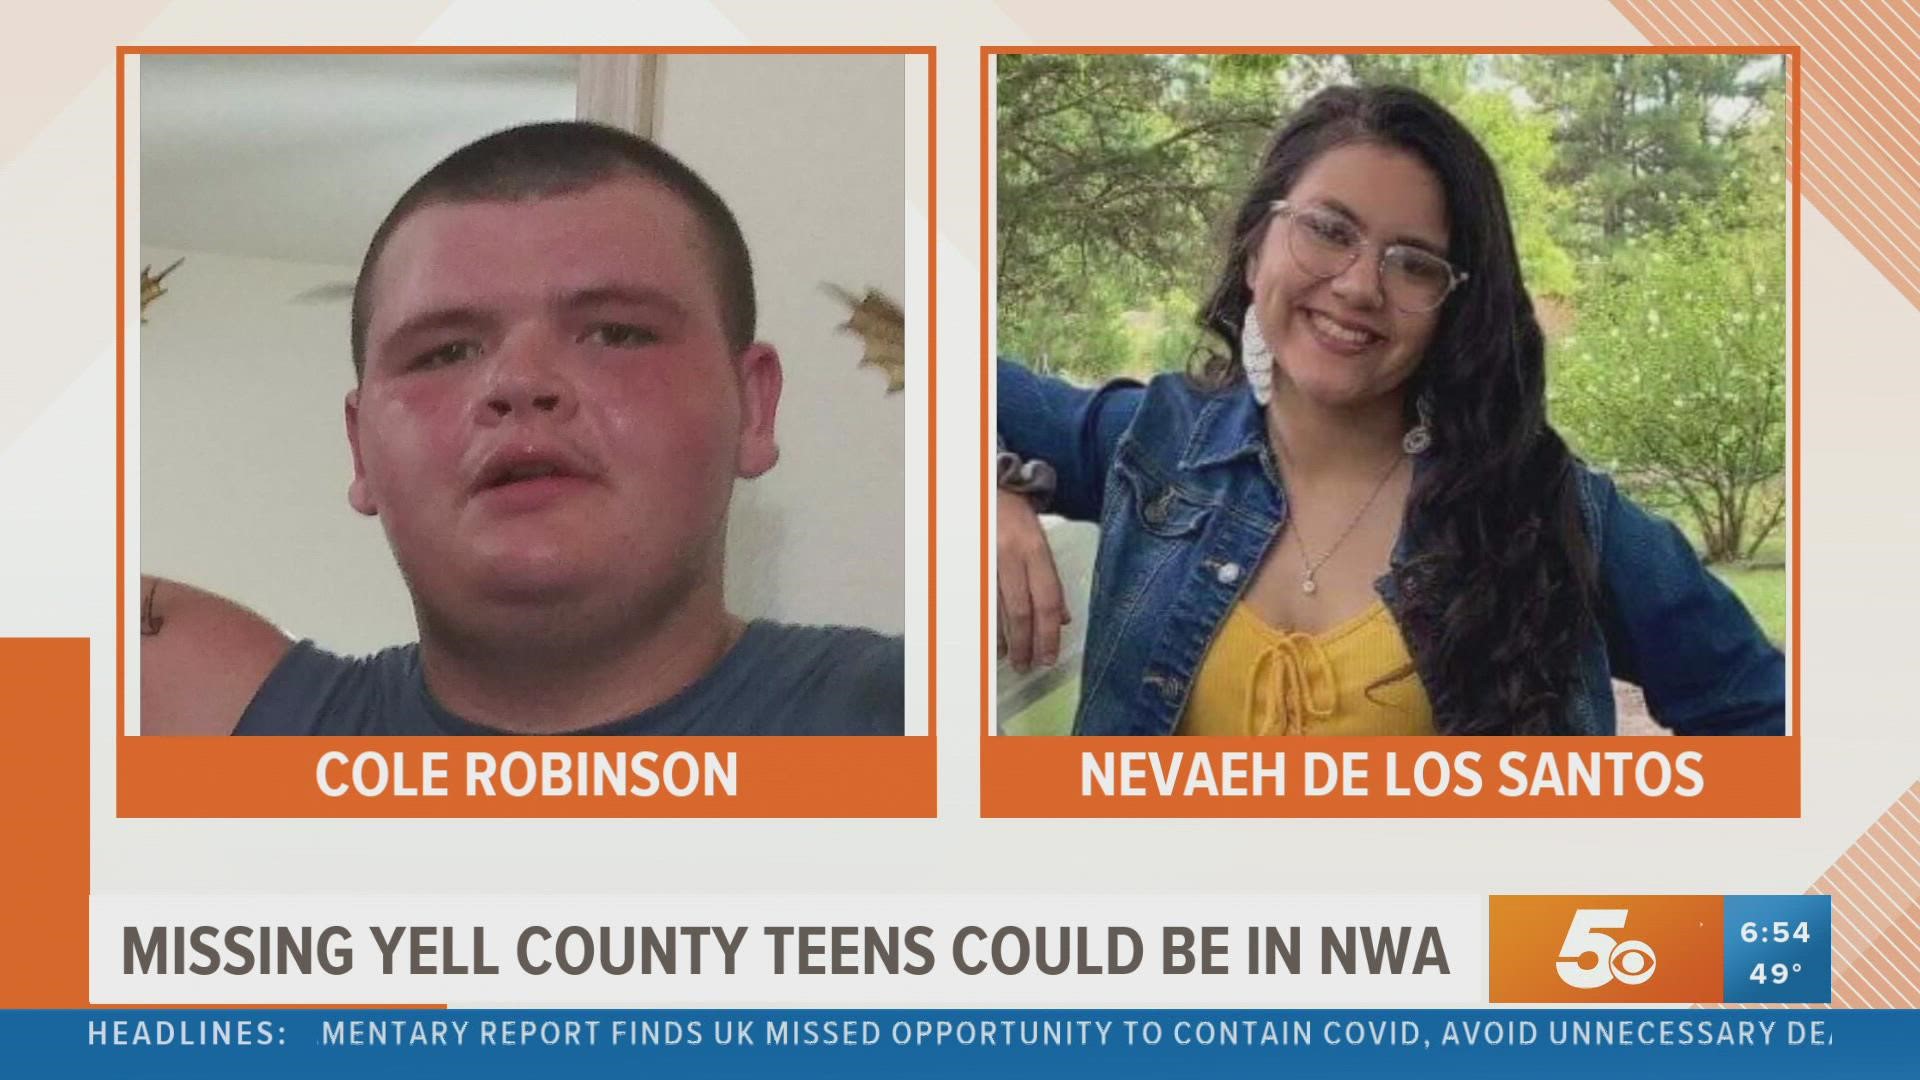 17-year-olds Cole Taylor Robinson and Nevaeh De Los Santos both left Two Rivers School Friday, Oct. 8, headed to the NWA area.